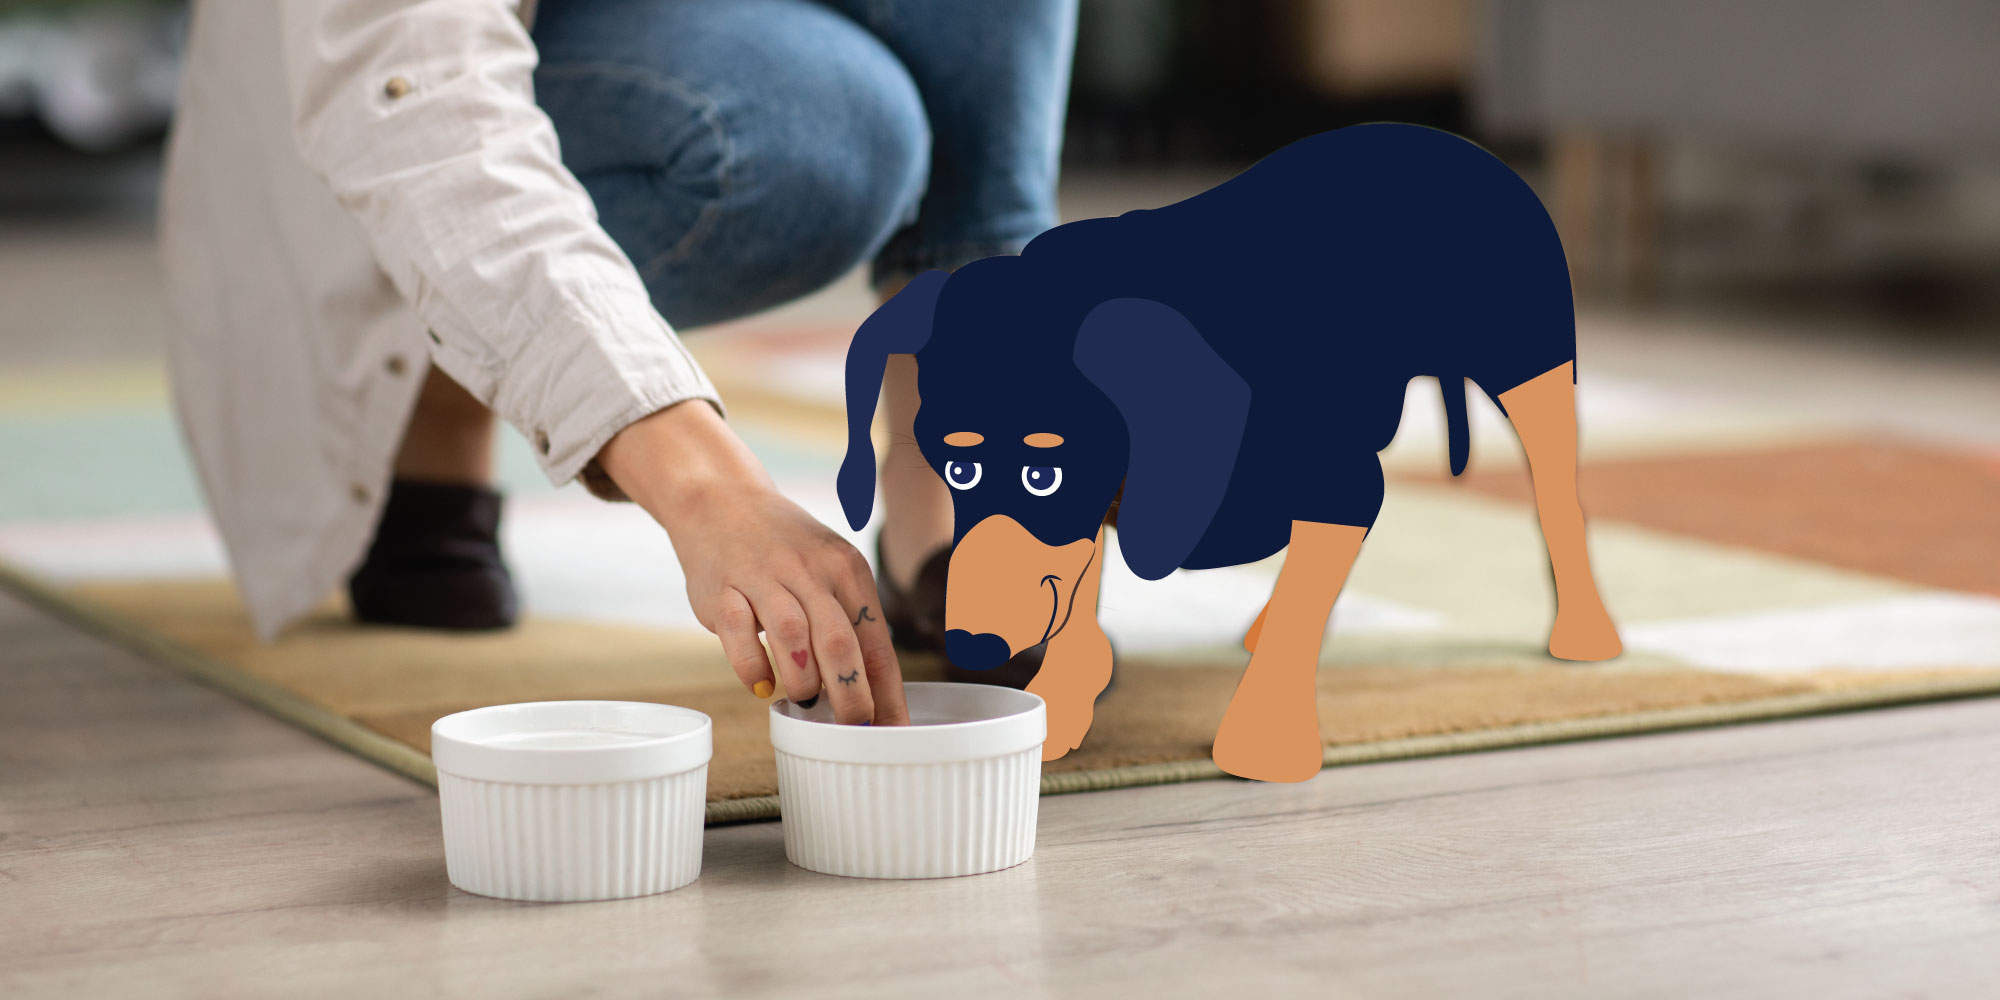 Could Your Dog Benefit from an Elevated Food Bowl?